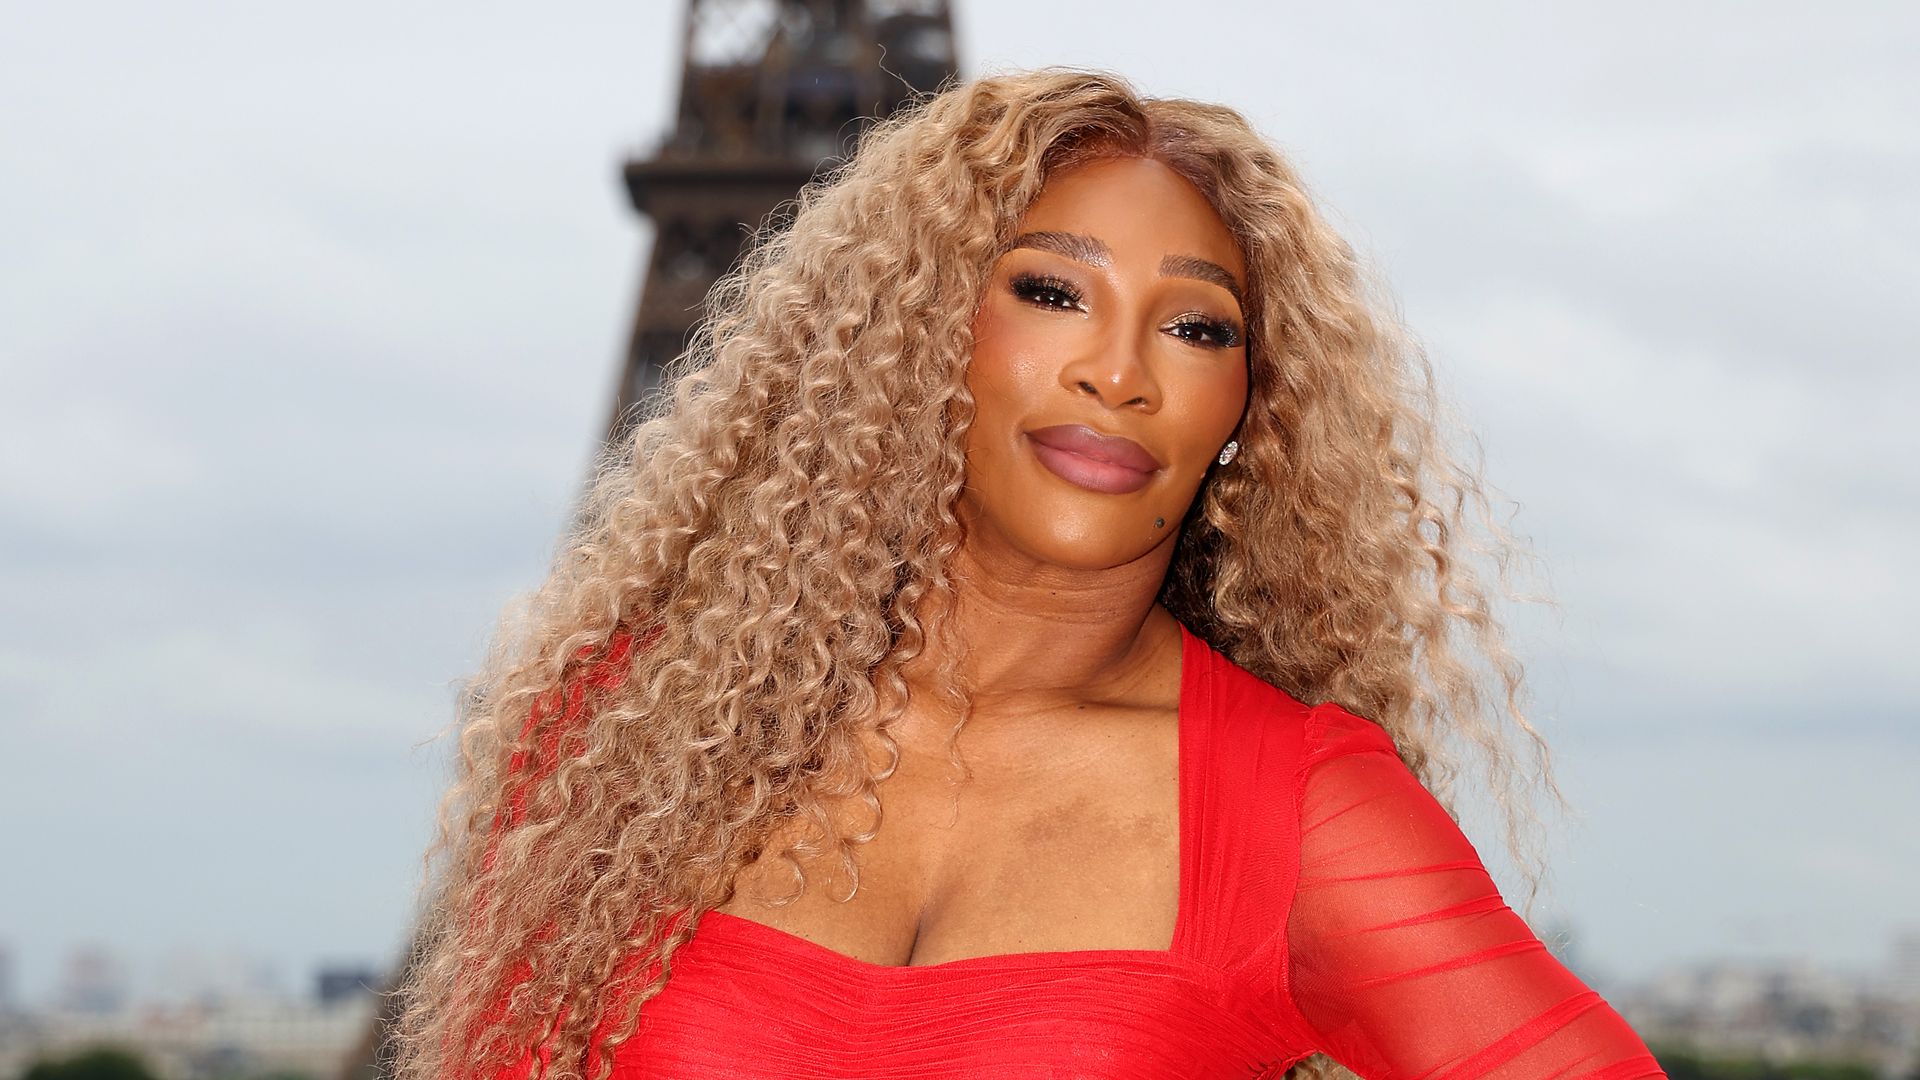 Serena Williams is speaking out after a Parisian restaurant denied access to her family